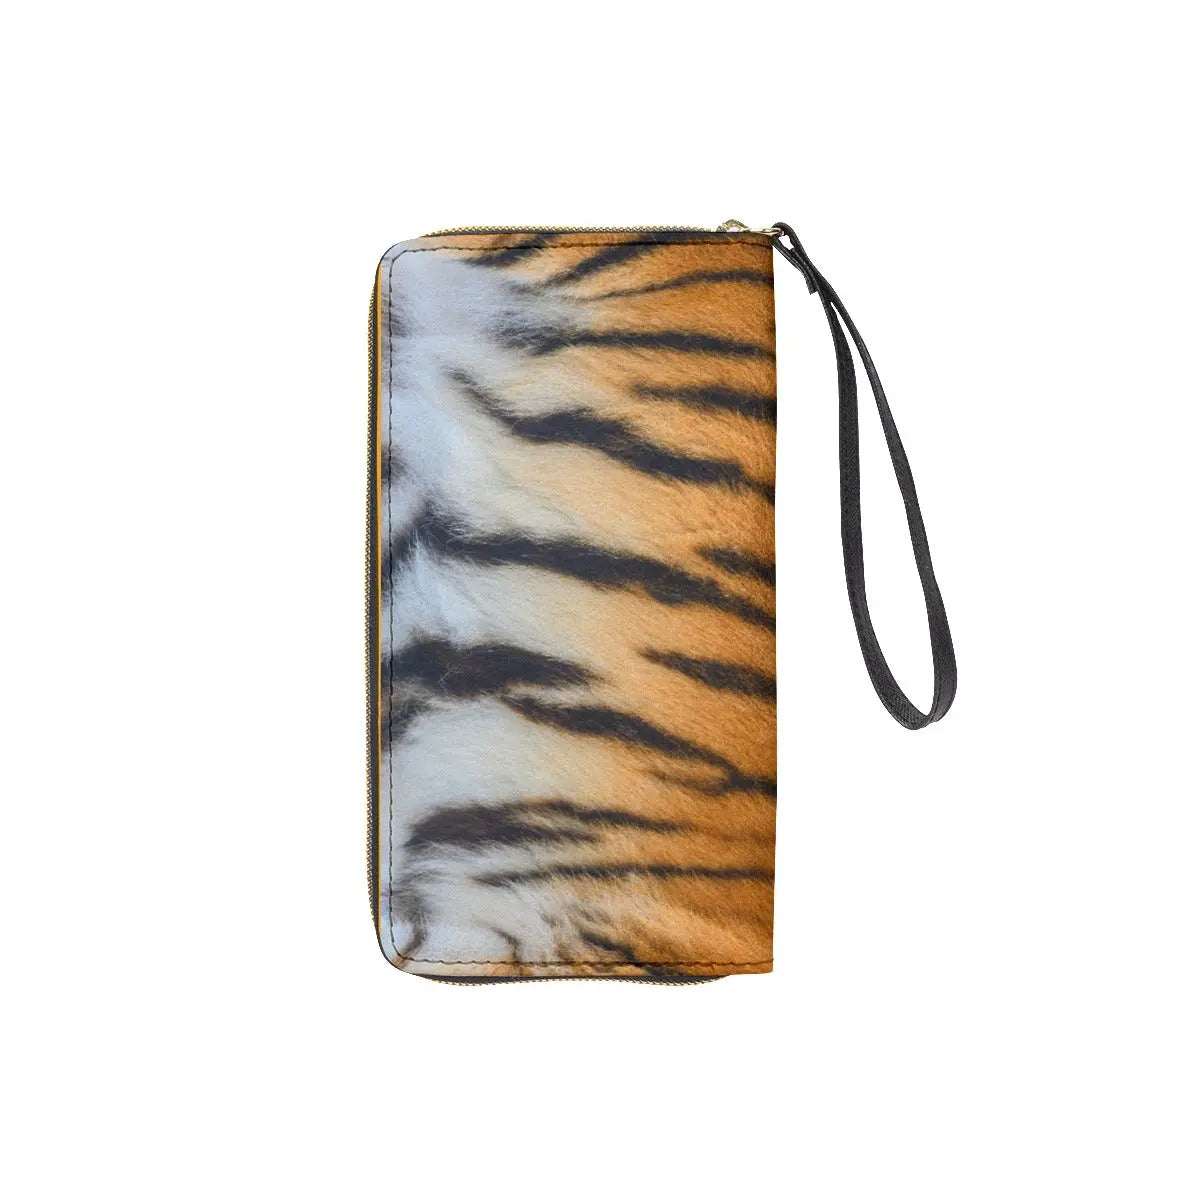 Wallet with tiger print